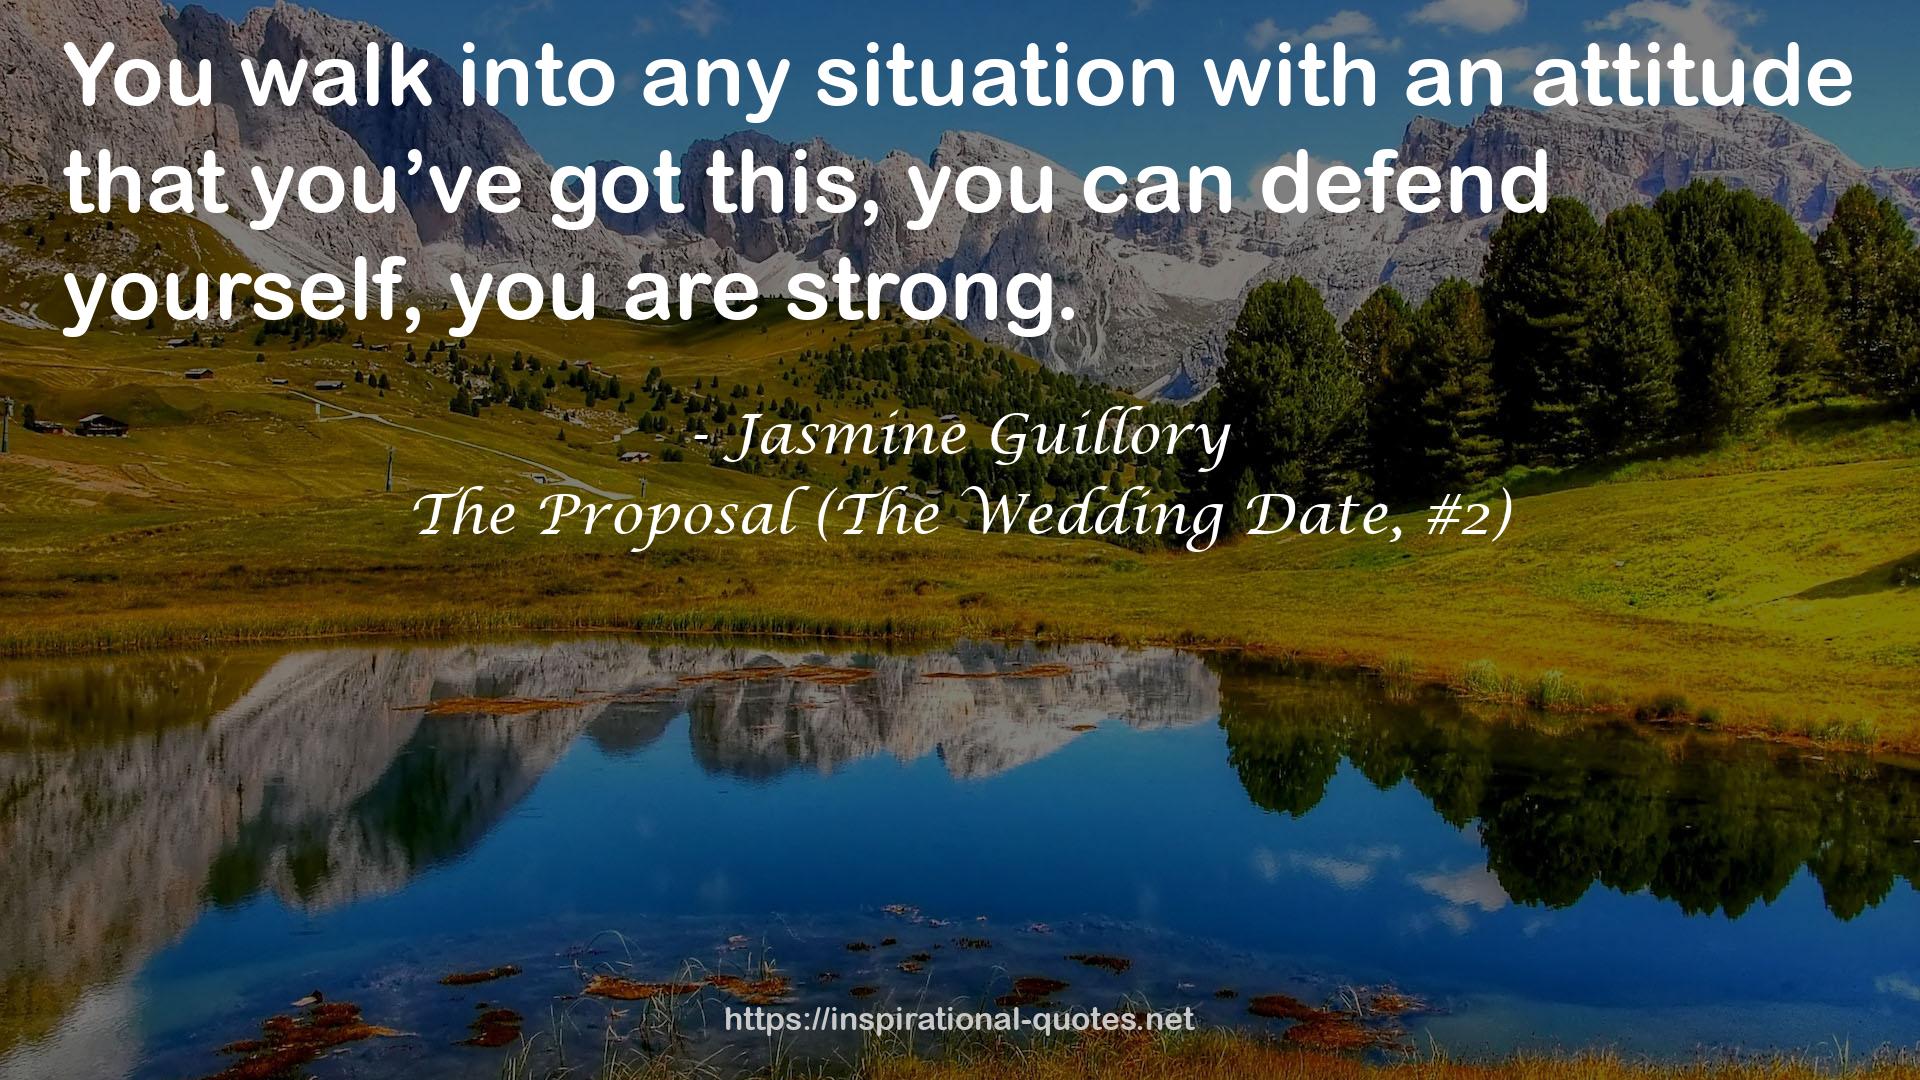 Jasmine Guillory QUOTES